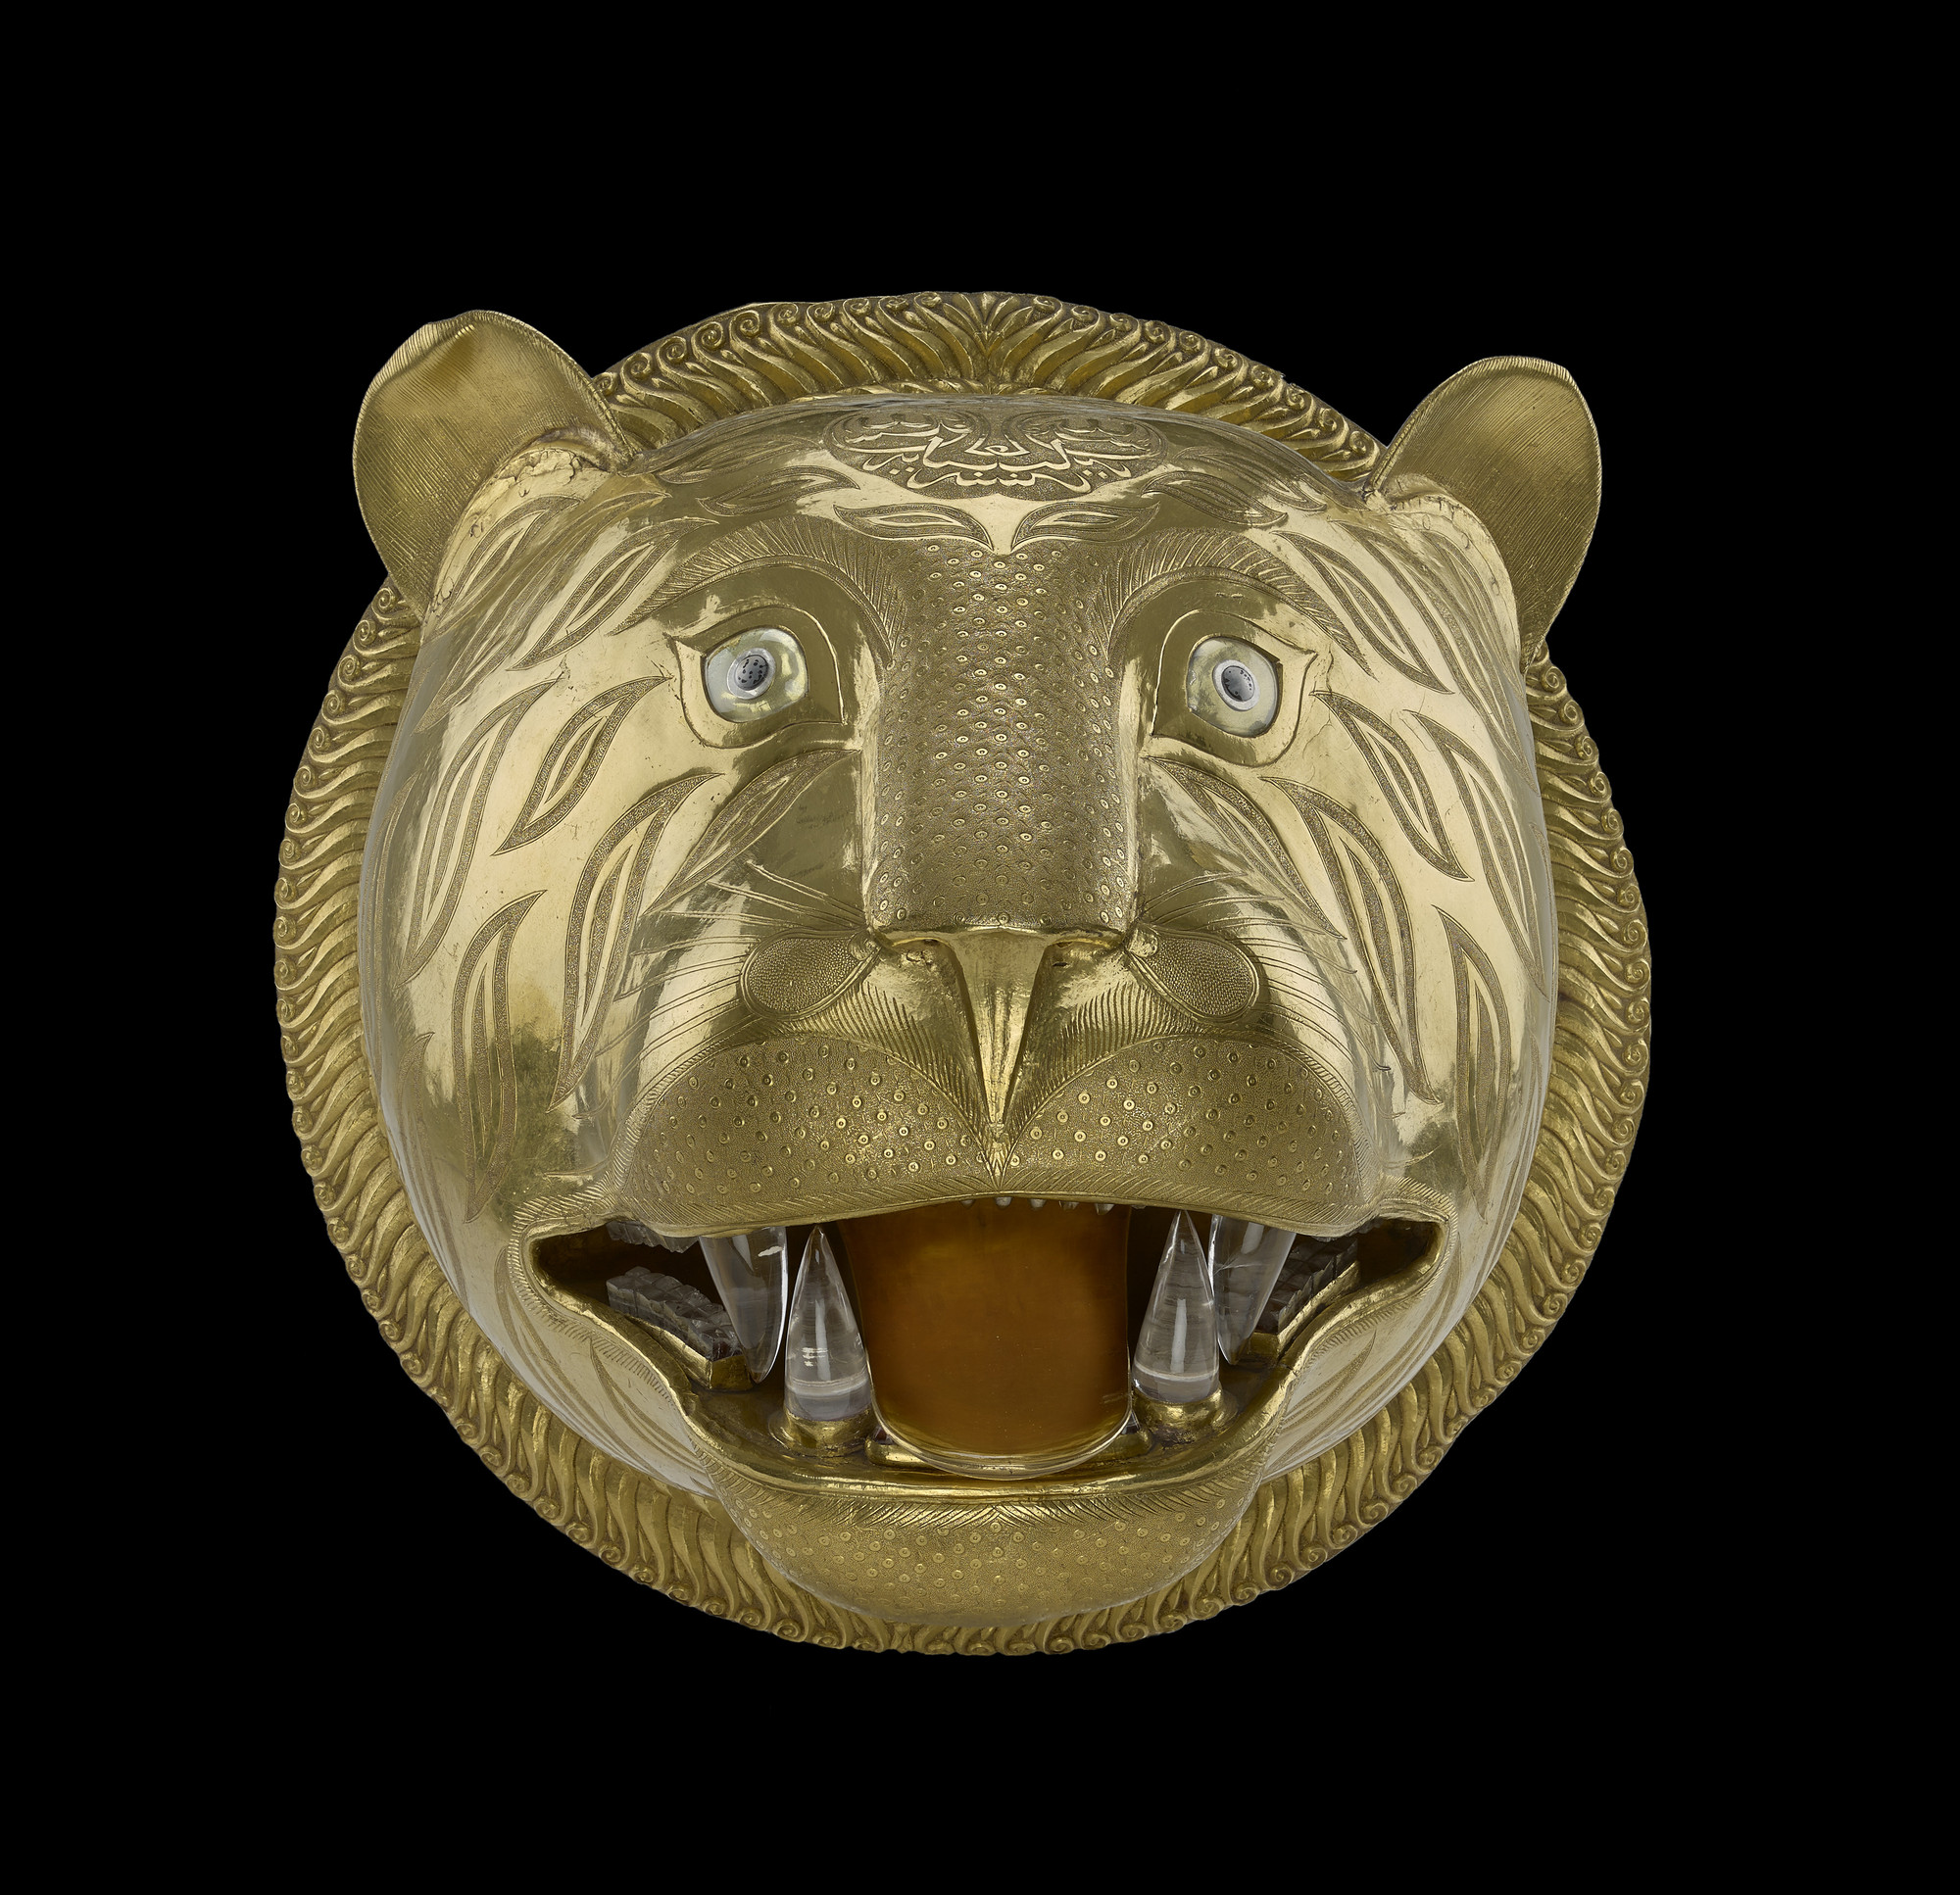 Tiger Head from Tipu's Throne (Image Courtesy: Royal Collection Trust)